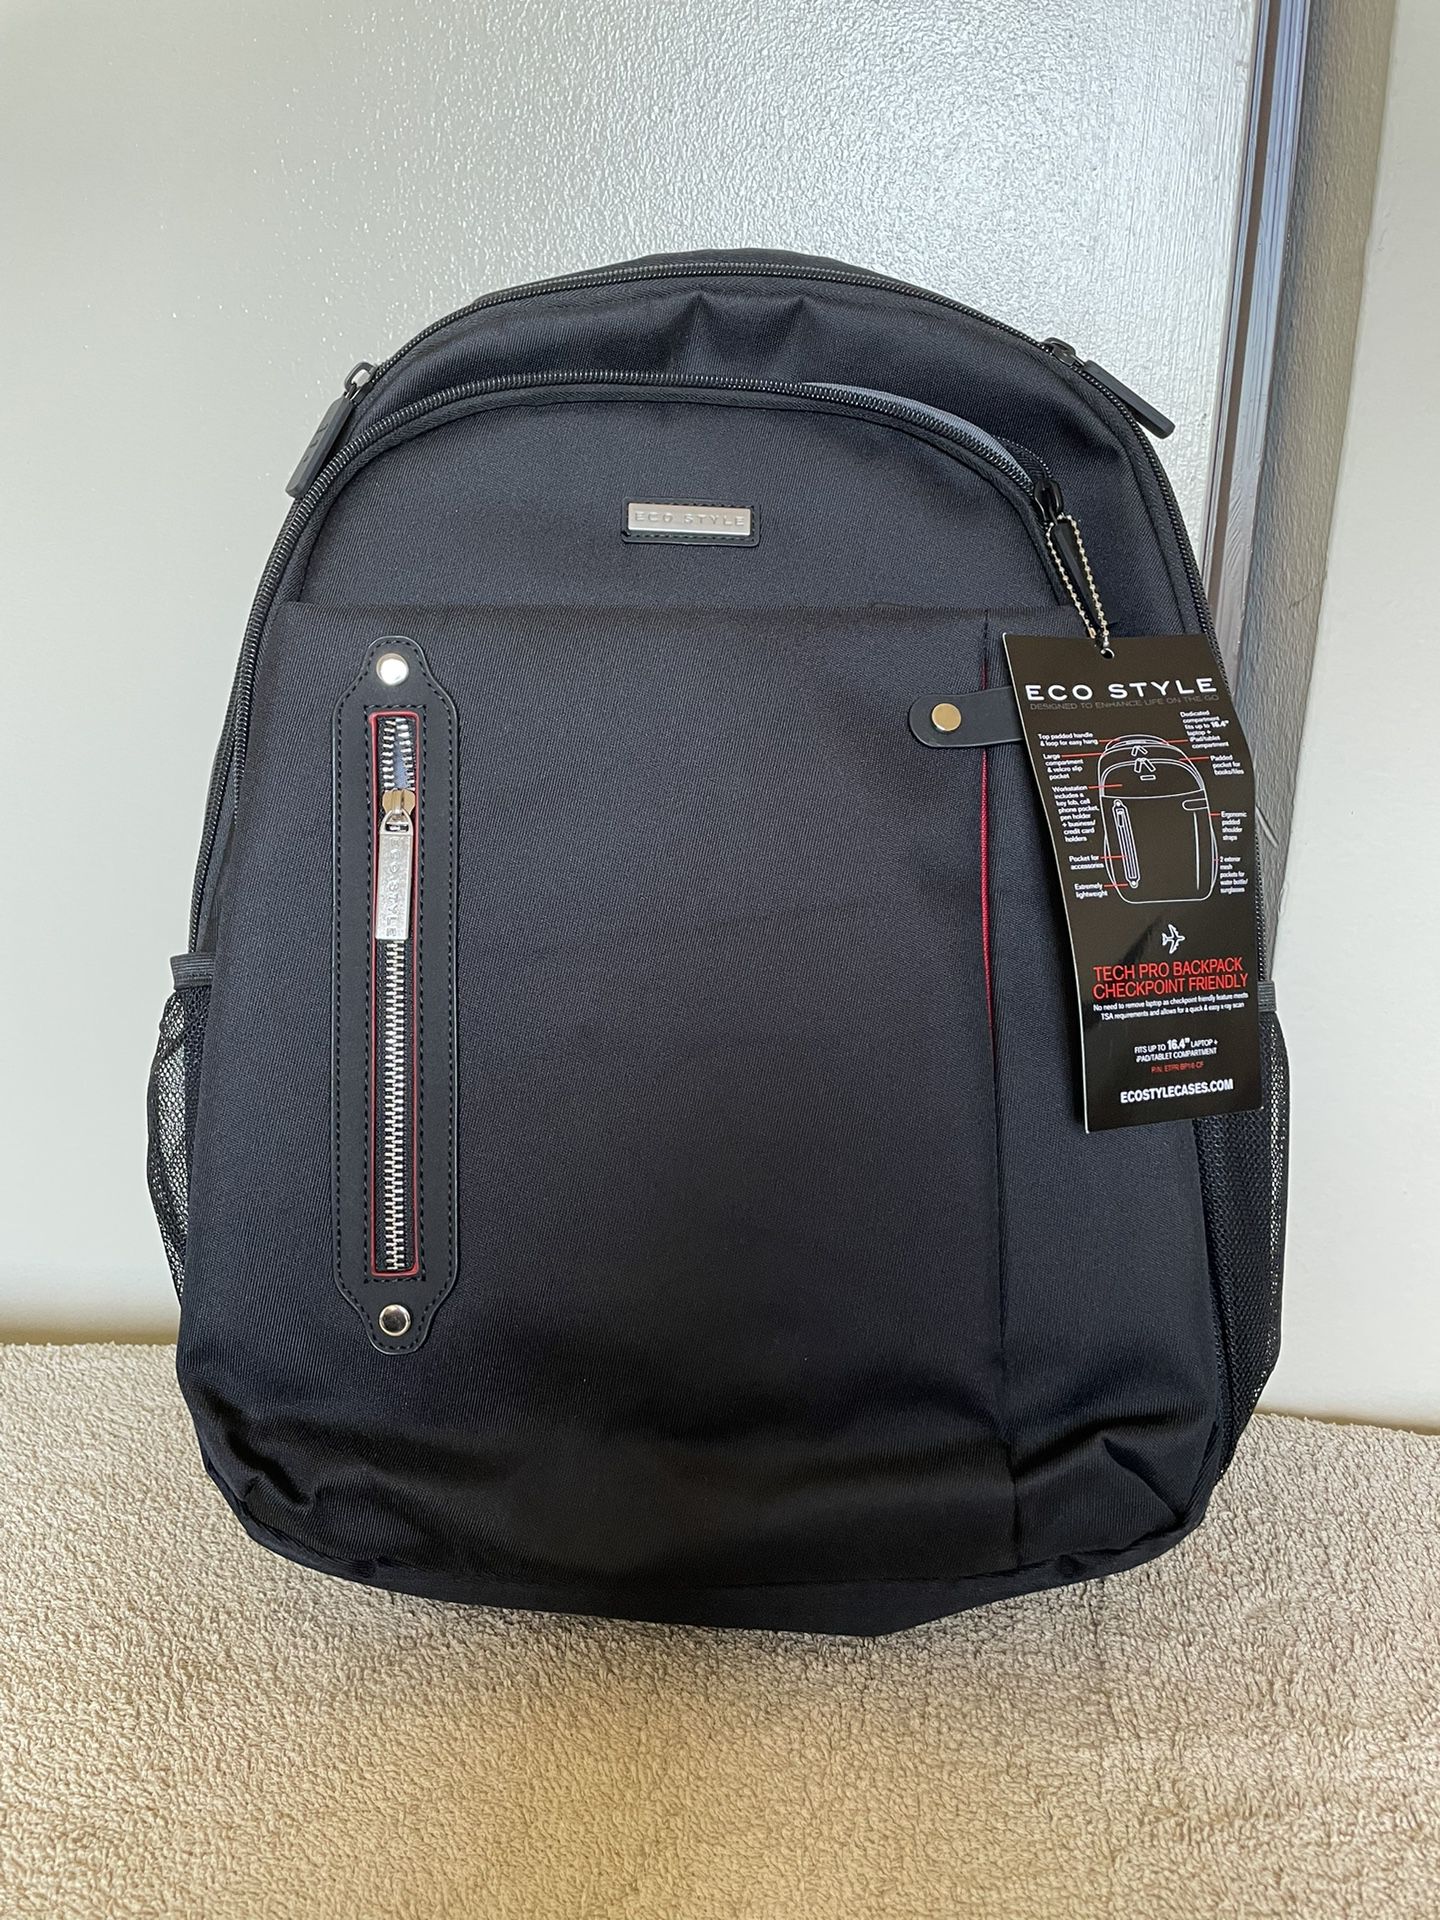 NEW Laptop + Tablet Backpack for Business Travels/Schools